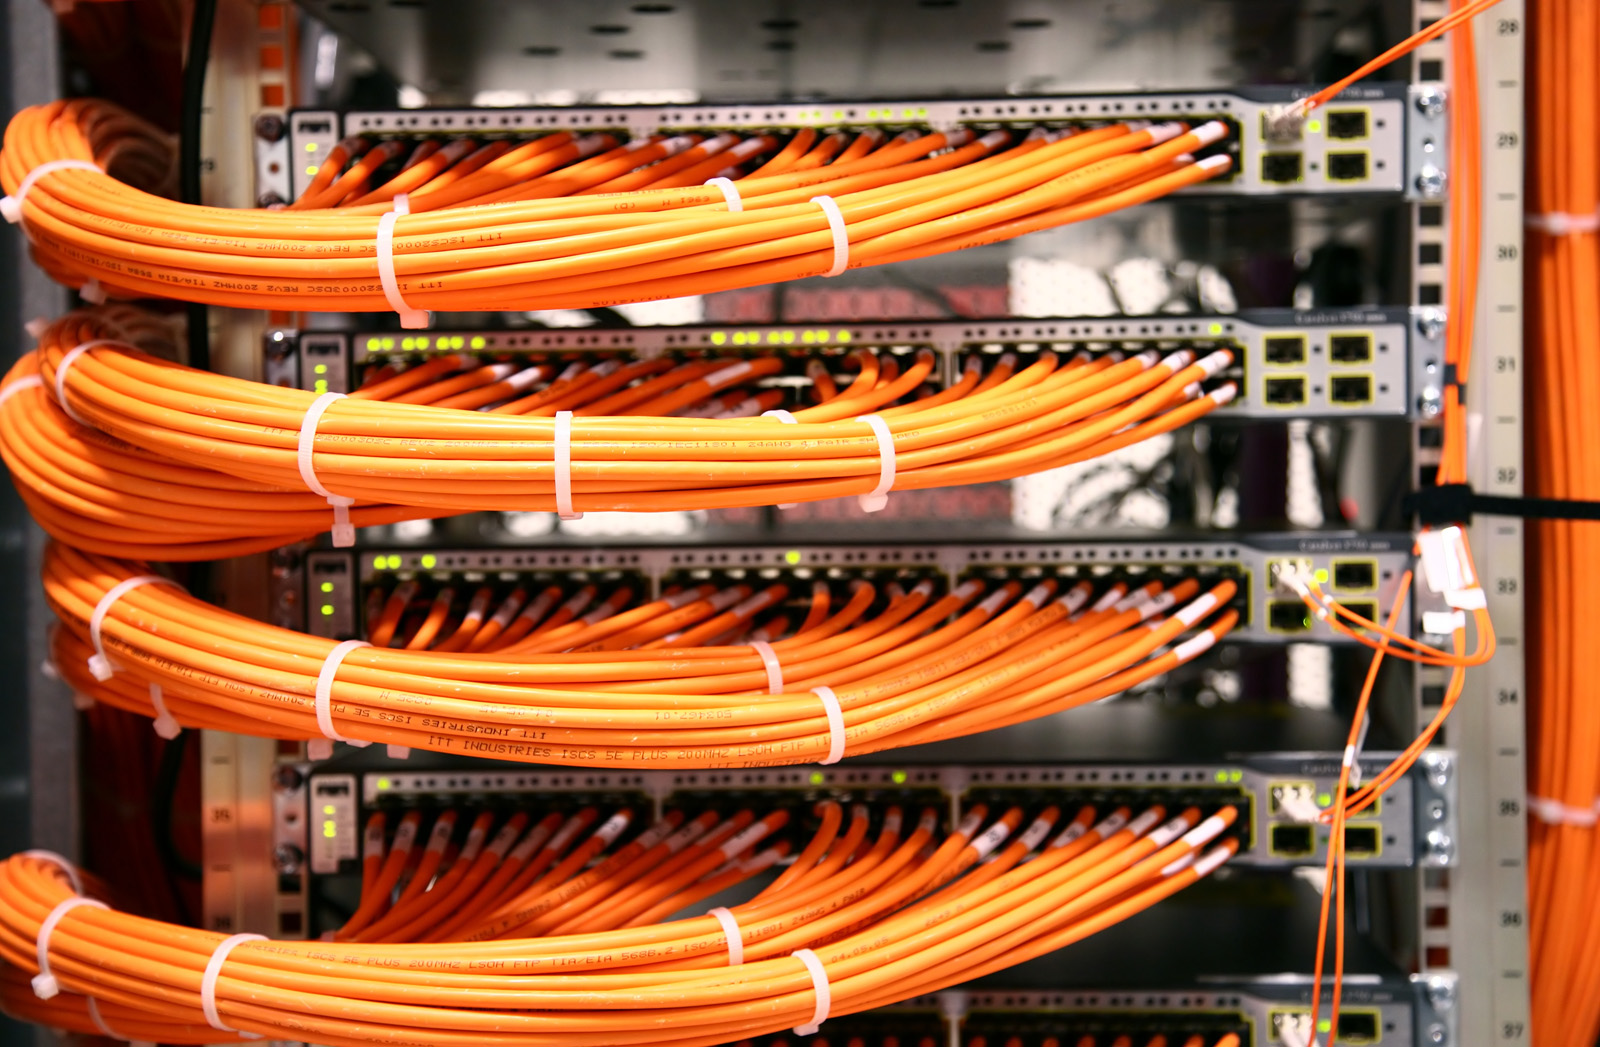 Lauderdale Lakes Florida Trusted Voice & Data Network Cabling Contractor